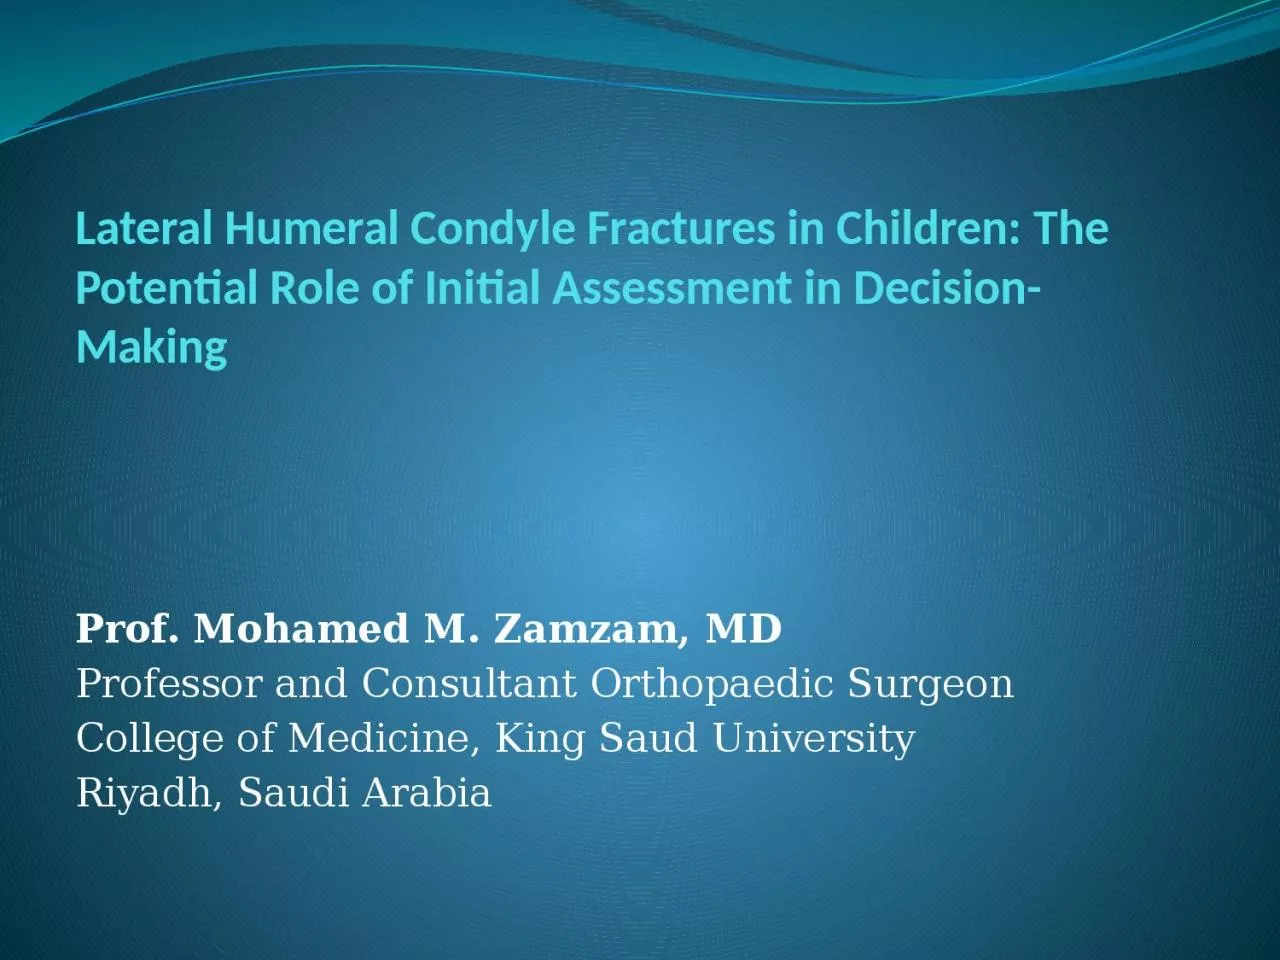 Lateral Humeral Condyle Fractures in Children: